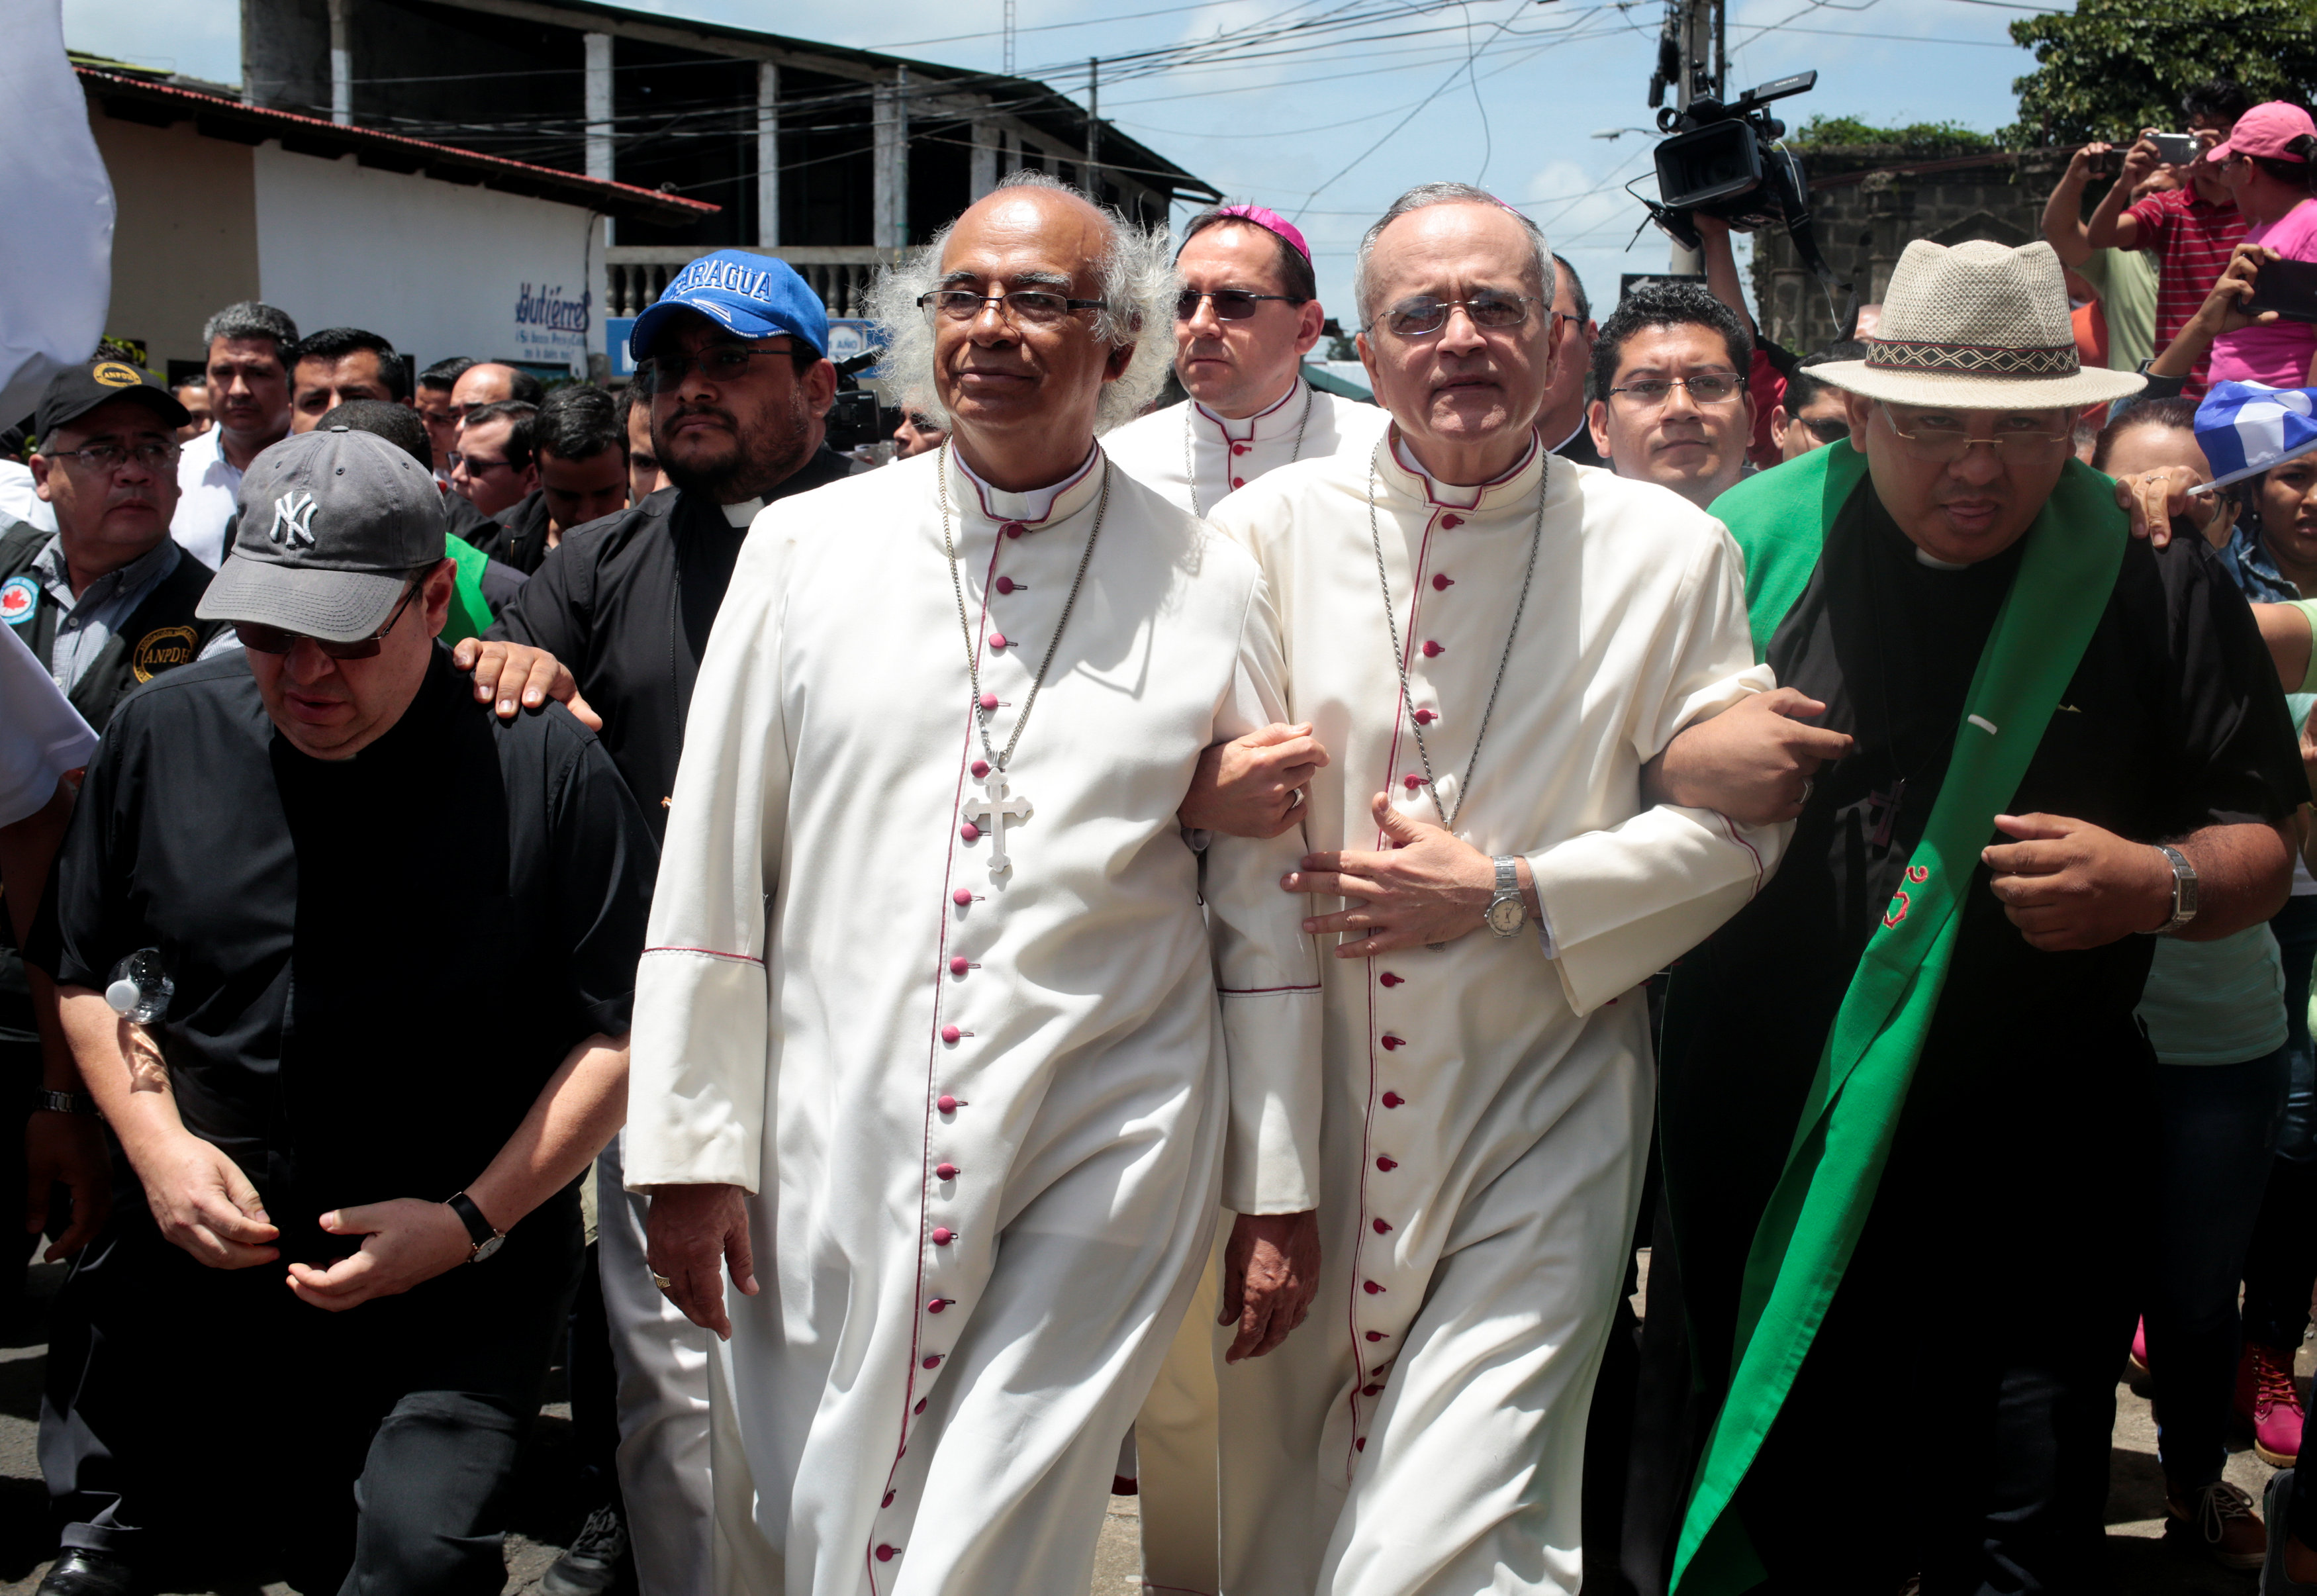 Bishops and journalists attacked at church in Nicaragua